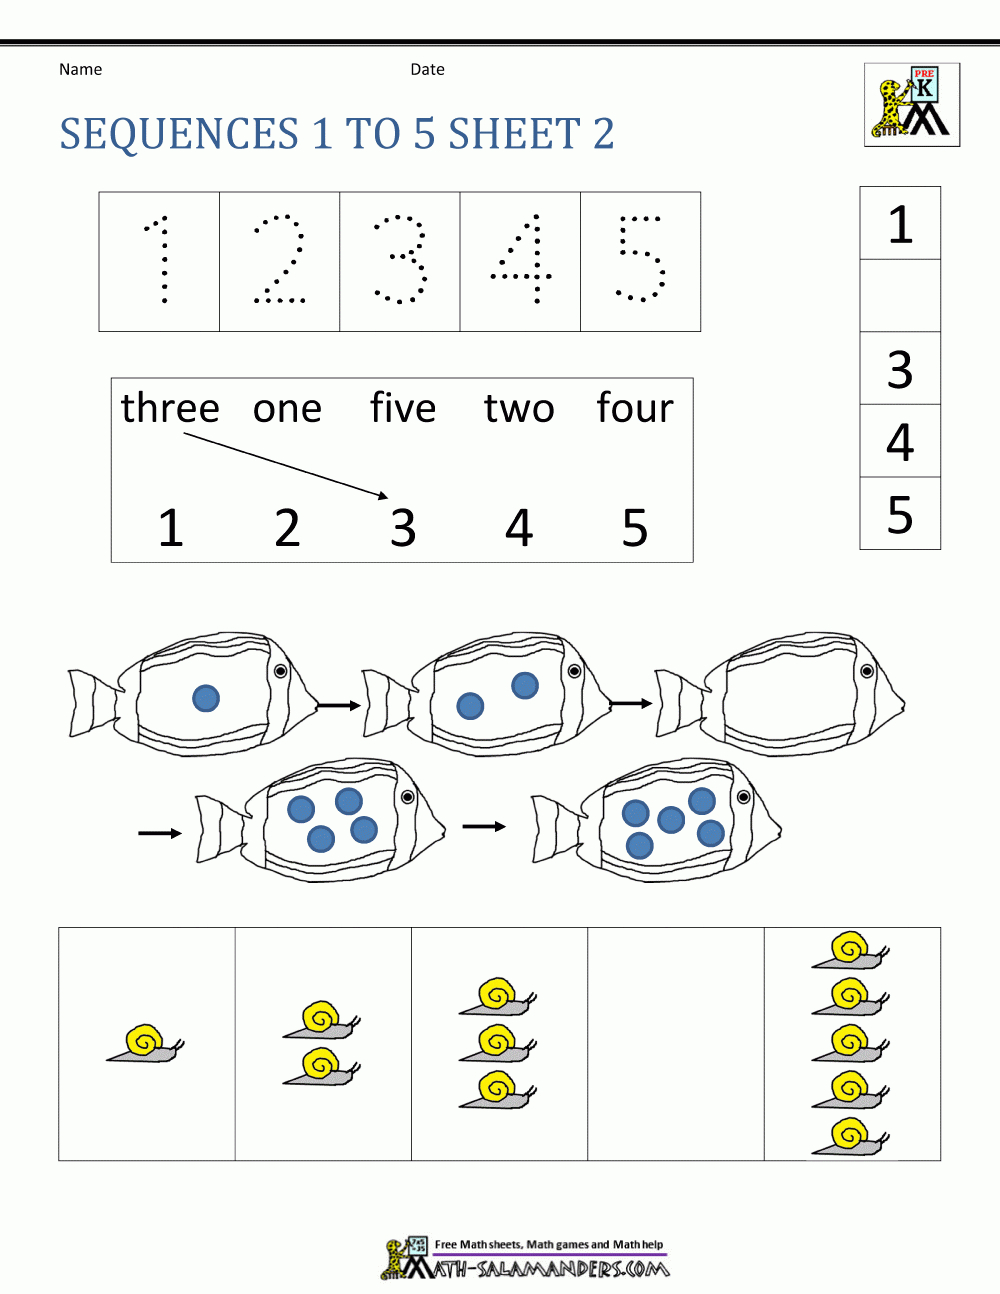 Preschool Number Worksheets Sequencing To 10 Free Printable Sequencing Worksheets 2Nd Grade